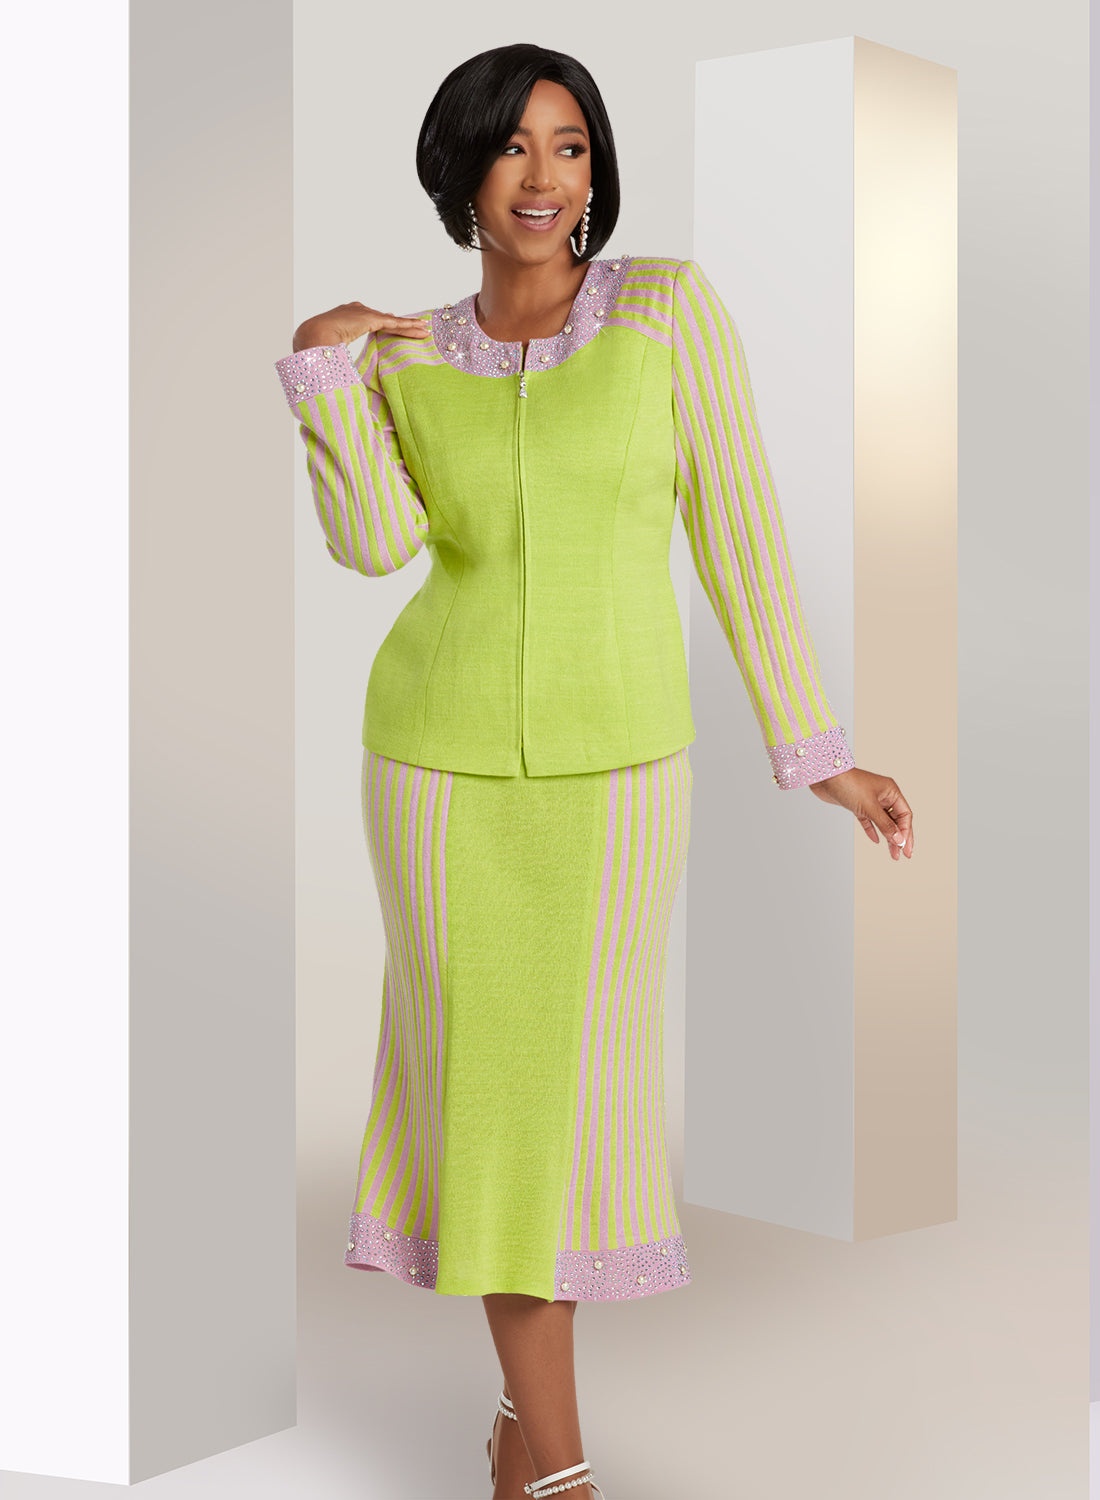 Donna Vinci 13400 - Pink Lime - Stripe Zip Up Knit Skirt Suit with Pearls and Rhinestones